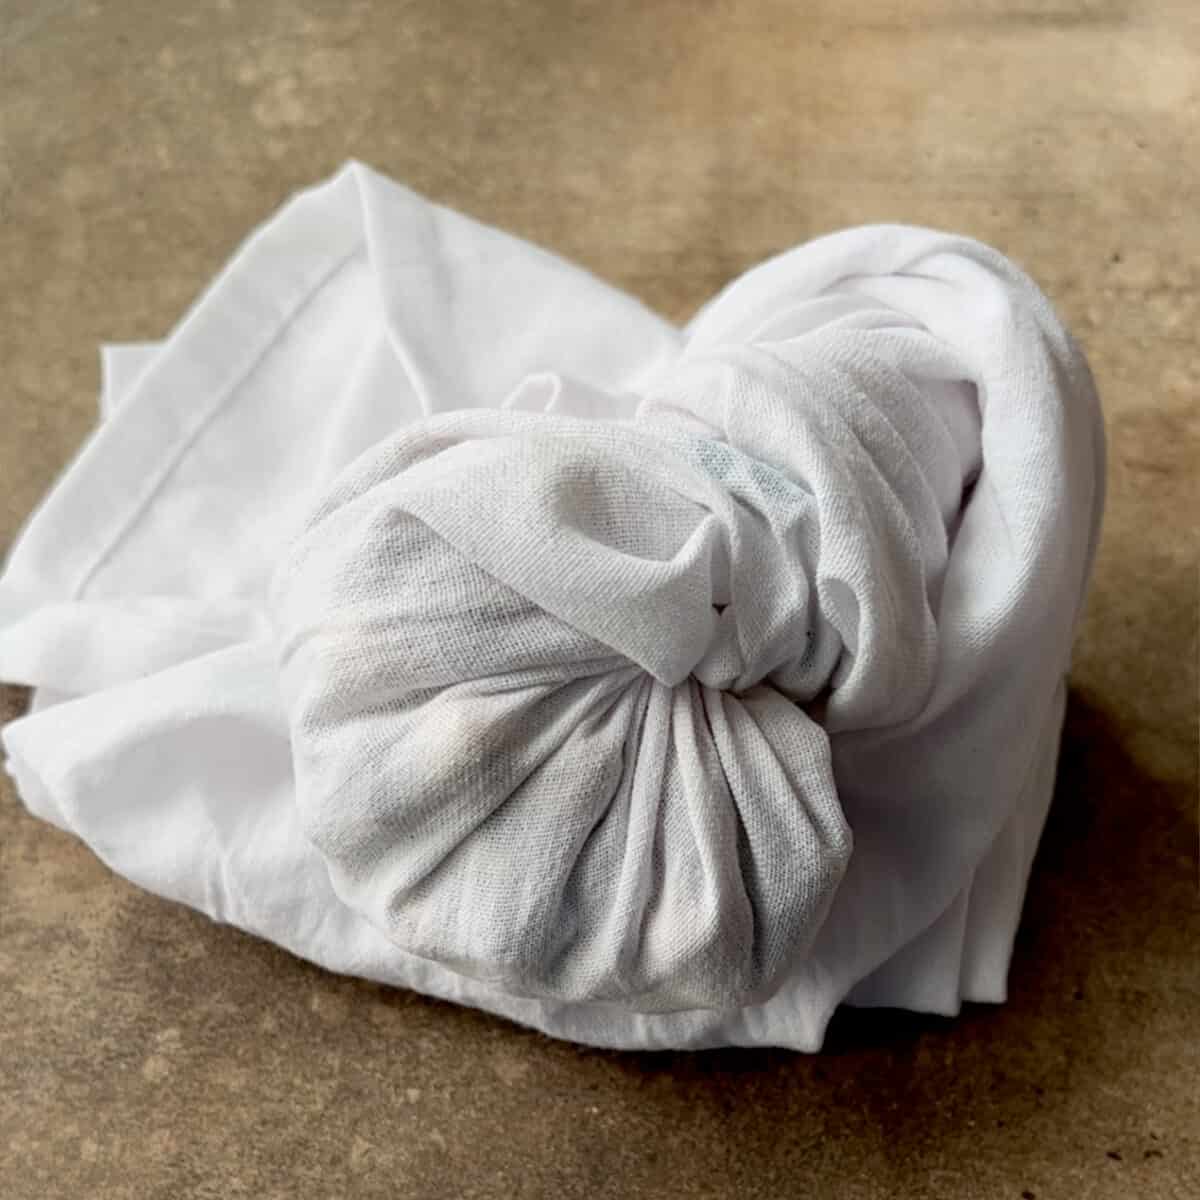 wrapped dish towel